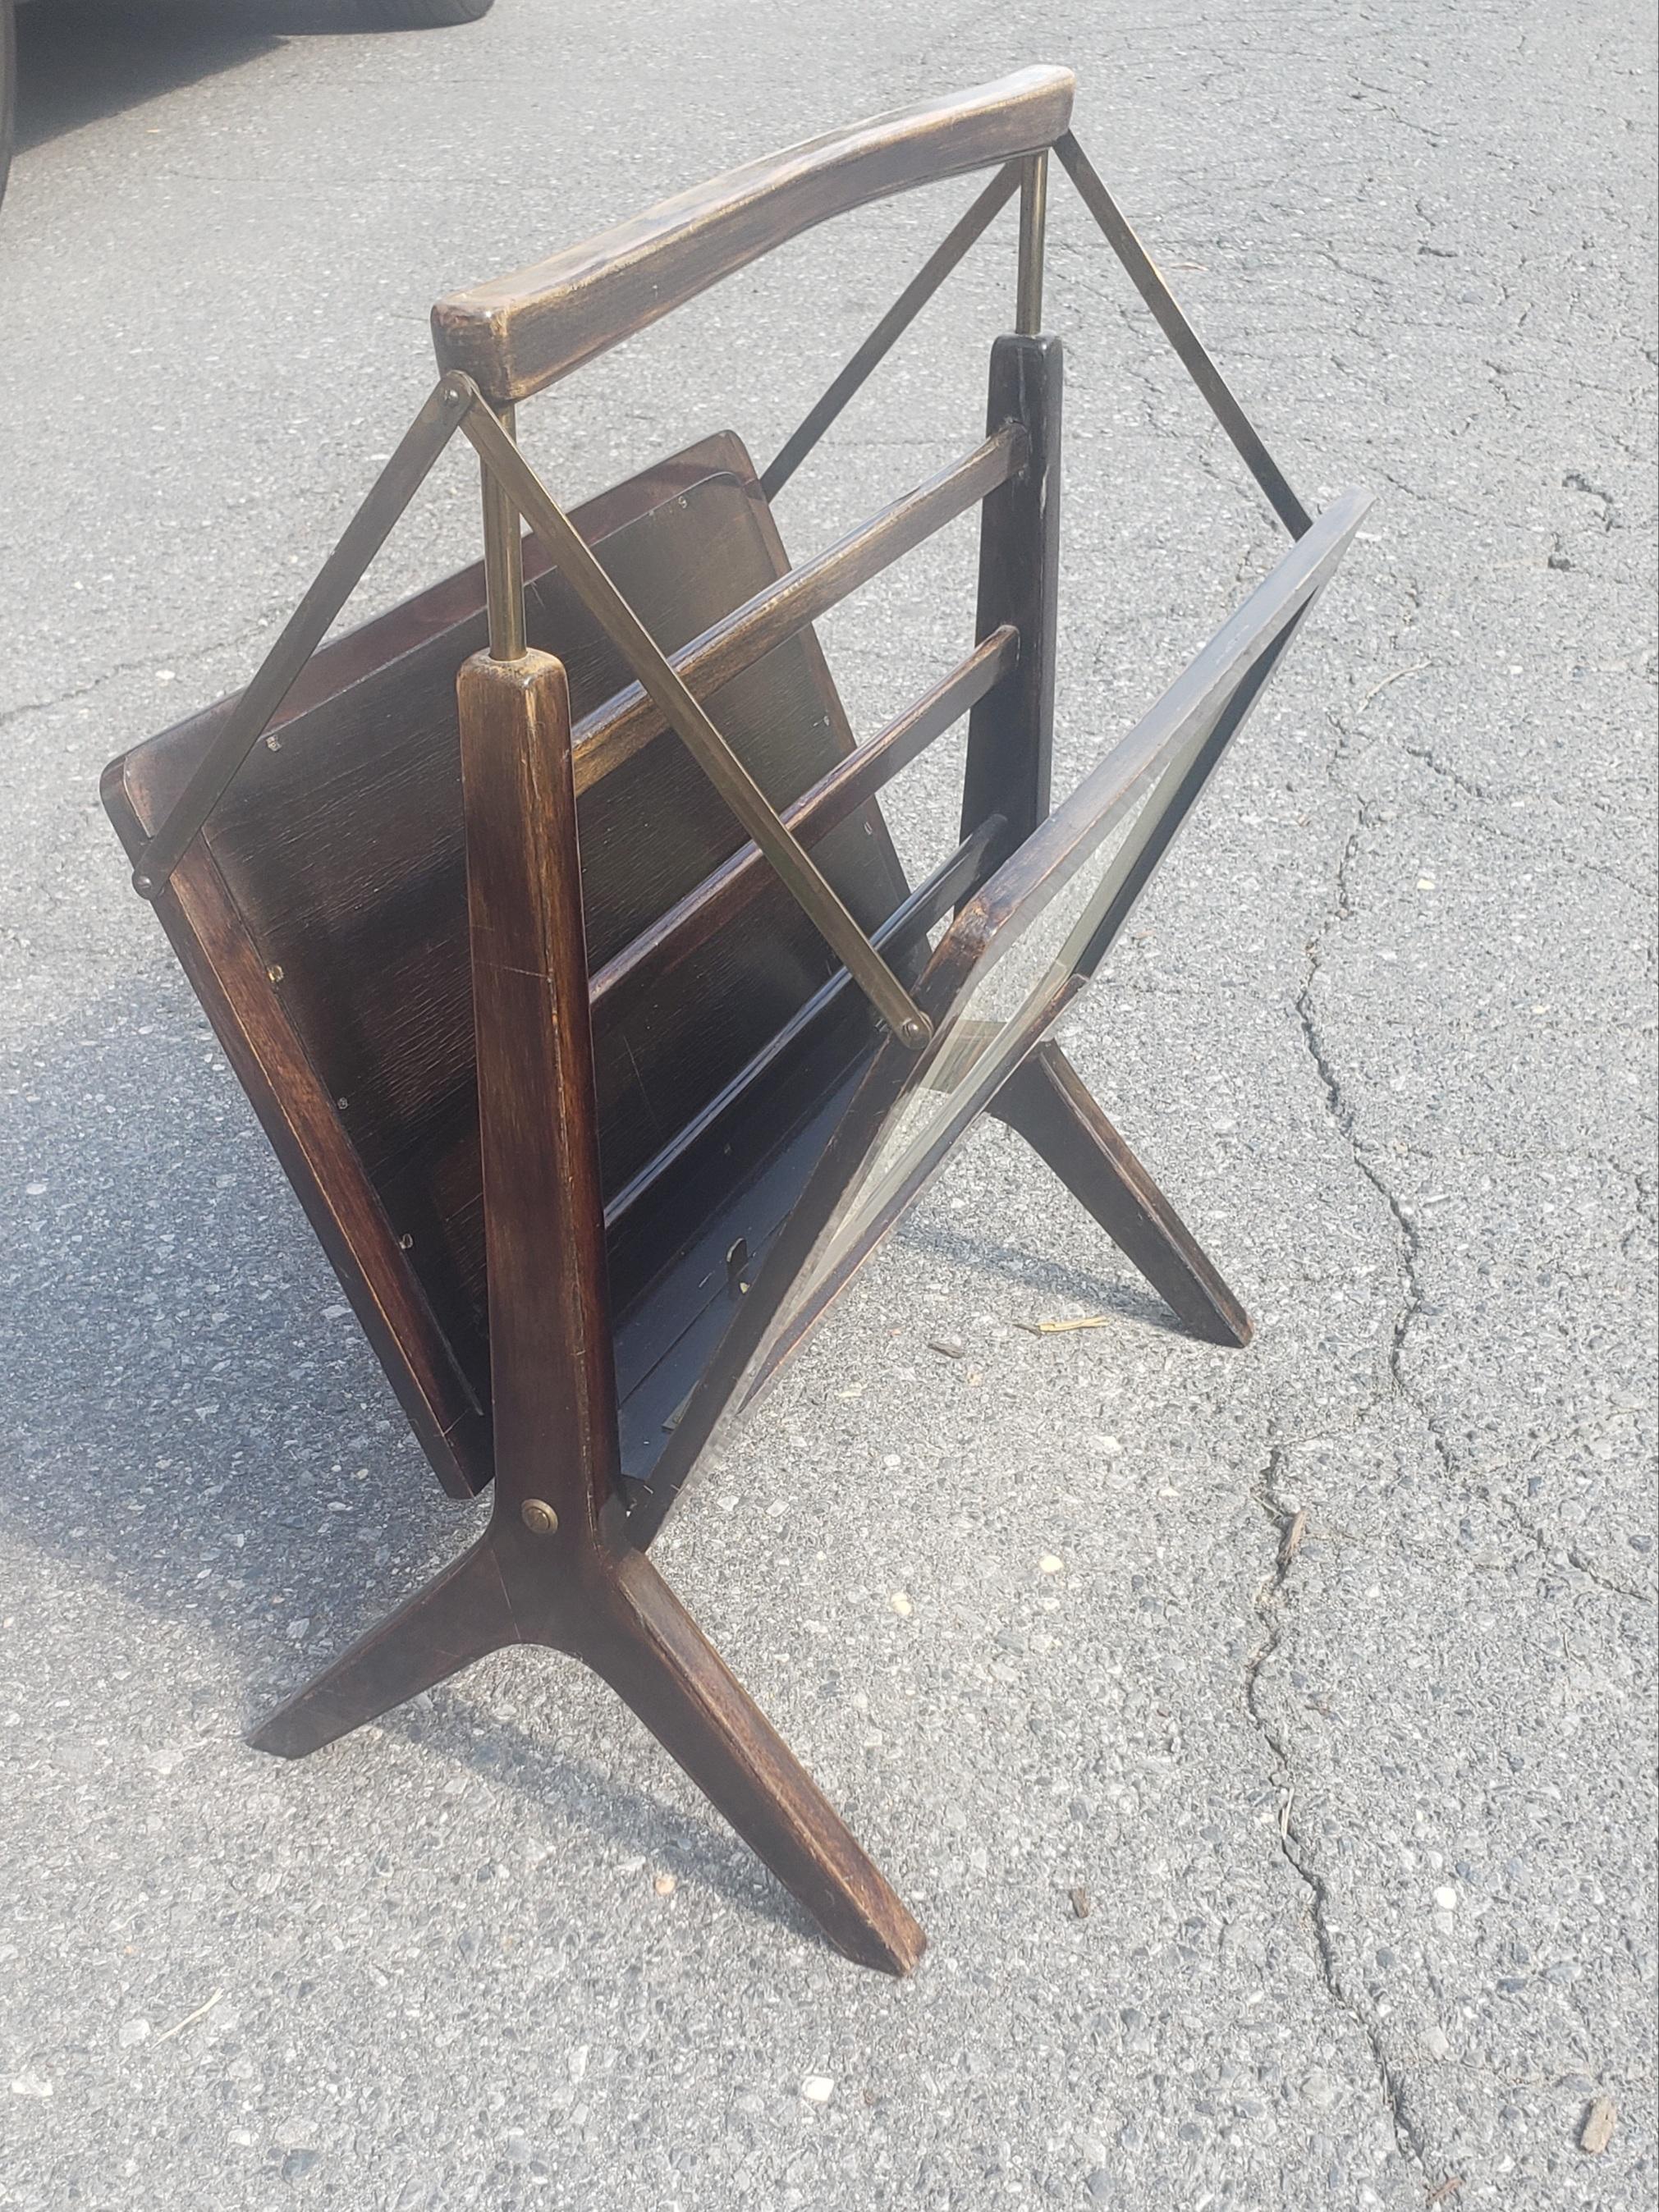 Other Midcentury Wood and Brass Italian Magazine Rack in Ico Parisi Style, 1950s For Sale